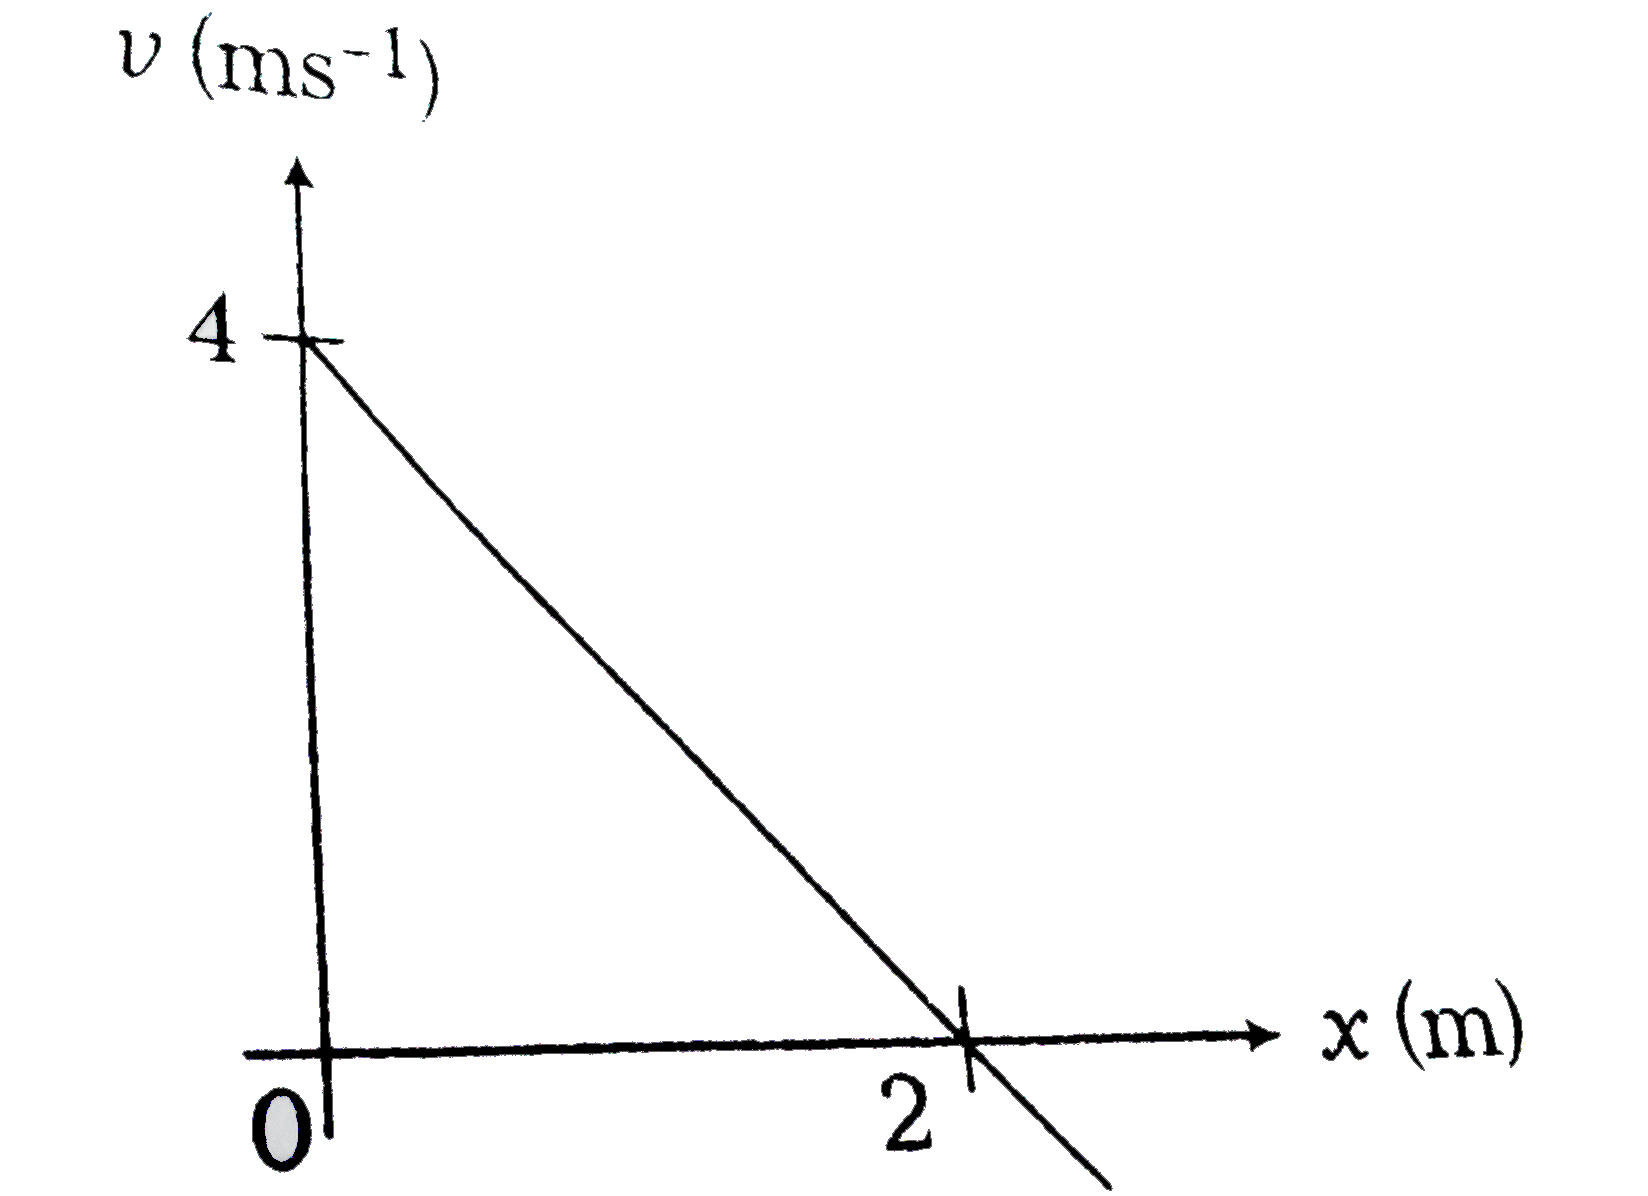 The velocity (upsilon) of a particle moving along X-axis varies with its position x as shown in figure. The acceleration (a) of particle varies with position (x) as